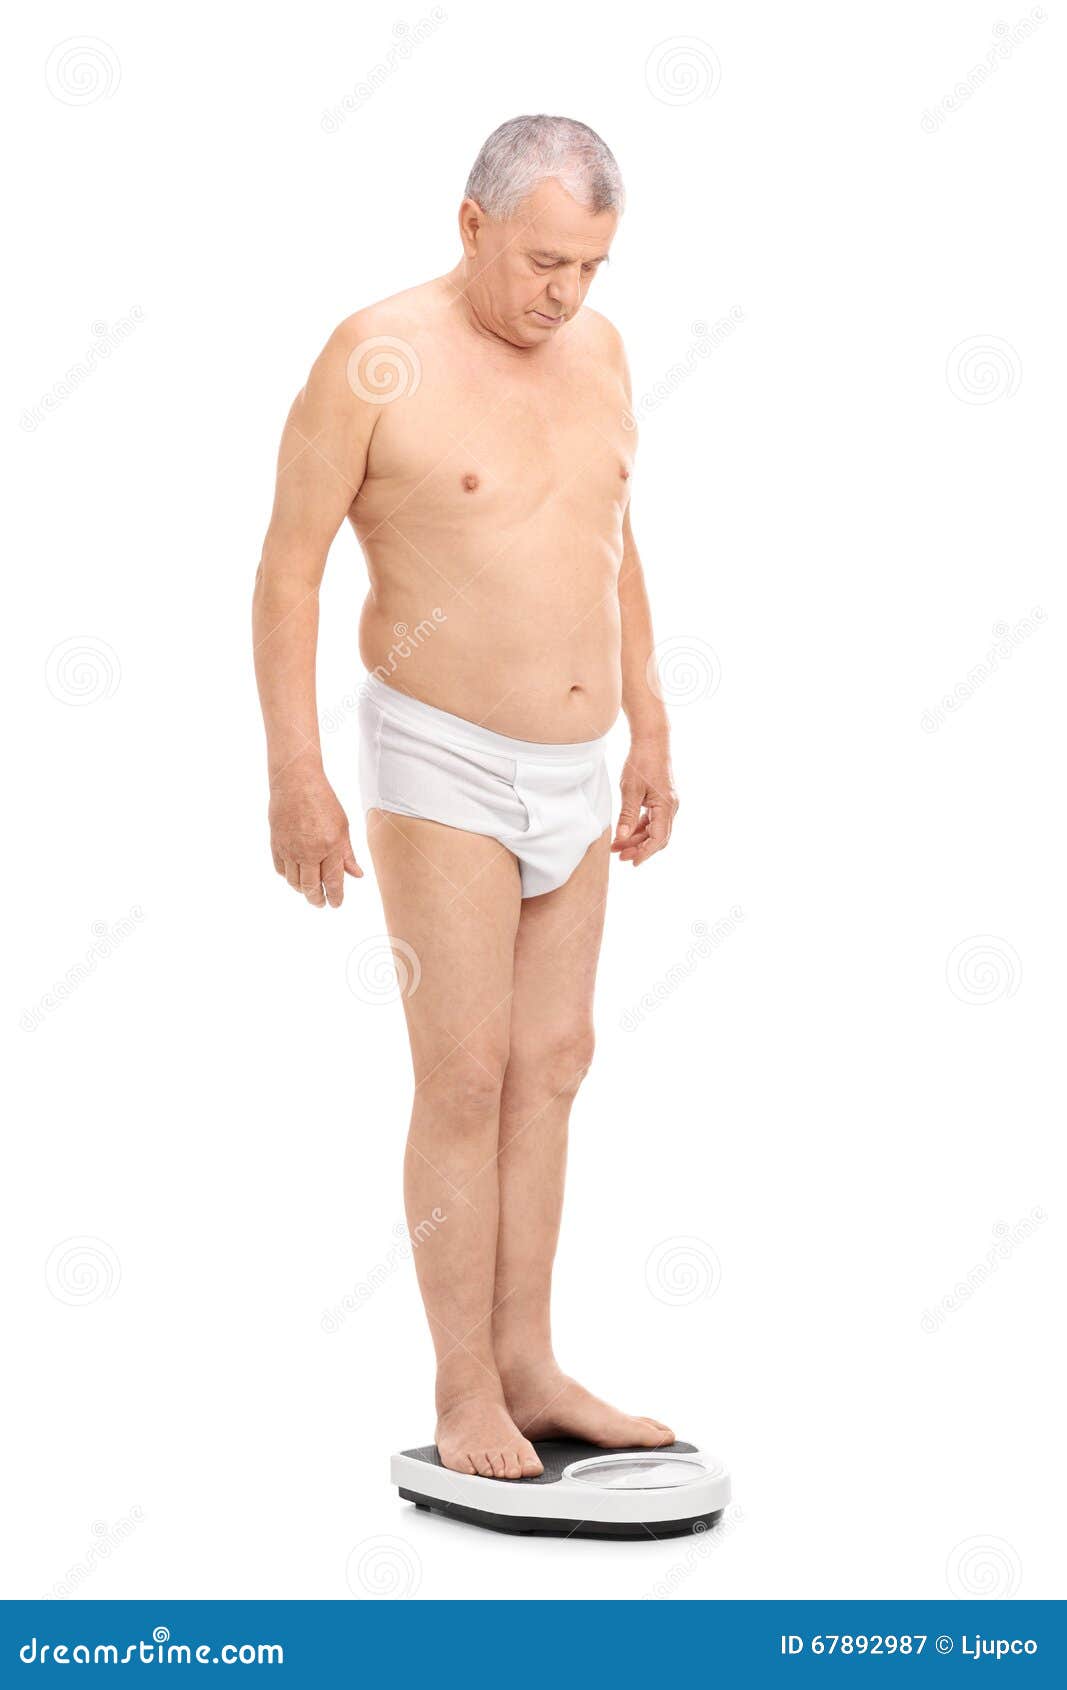 https://thumbs.dreamstime.com/z/senior-man-standing-weight-scale-full-length-portrait-white-underwear-measuring-his-isolated-white-67892987.jpg